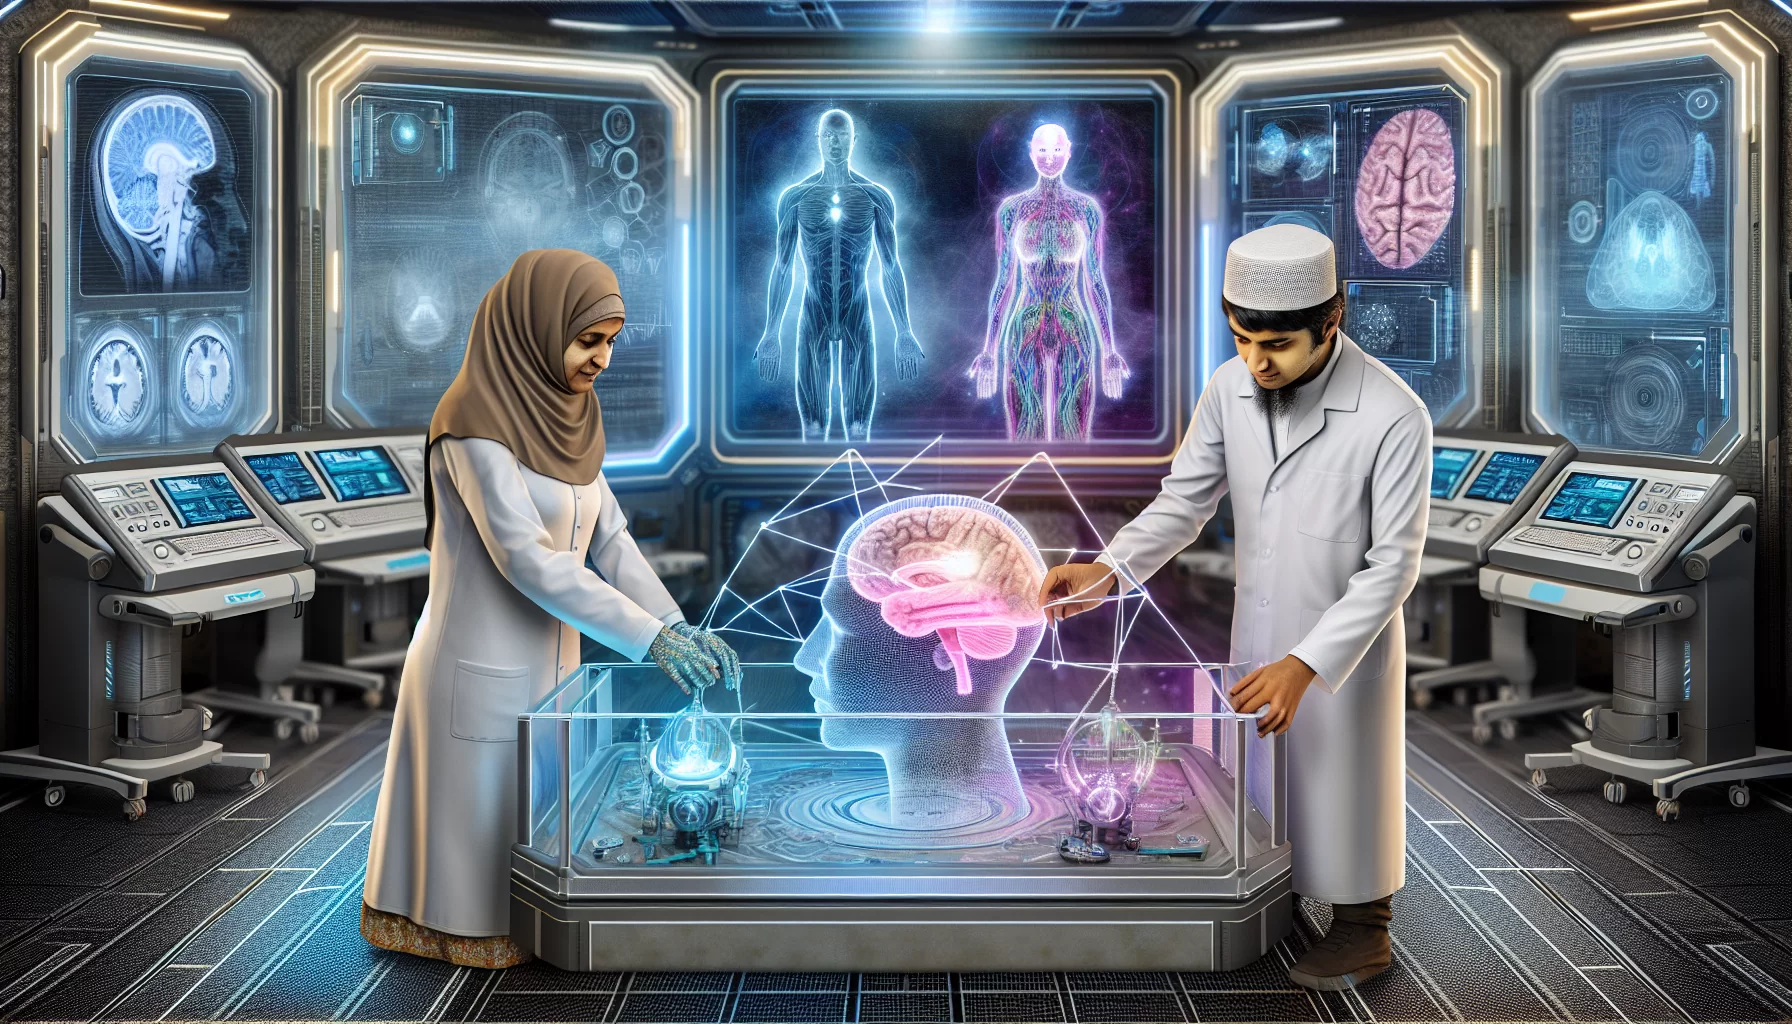 Synchron revolutionizing medical technology: from sci-fi to reality with neural interfaces